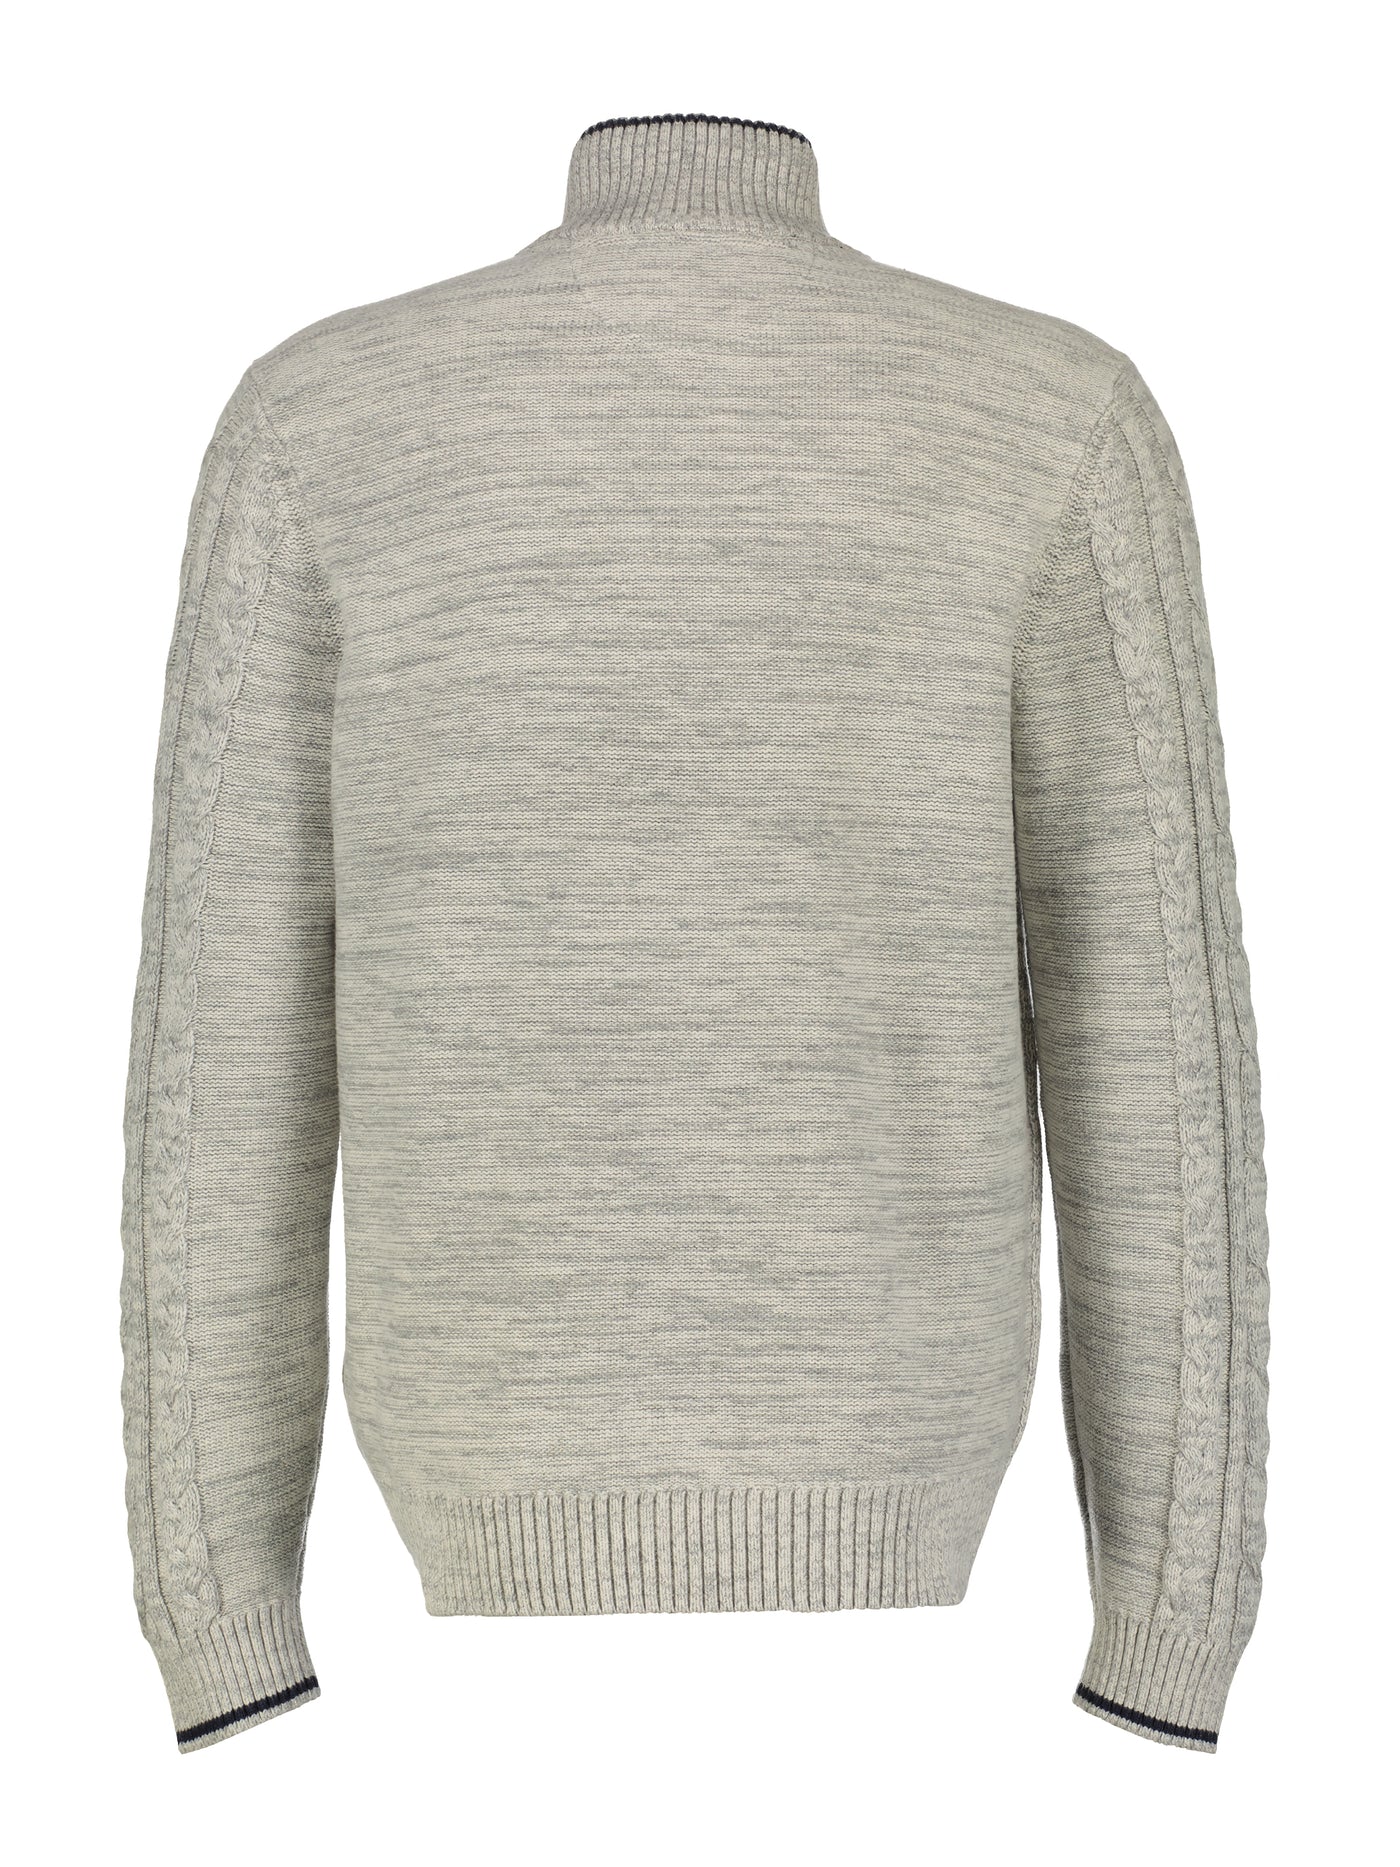 Knit sweater, wide ribbed with stand-up collar